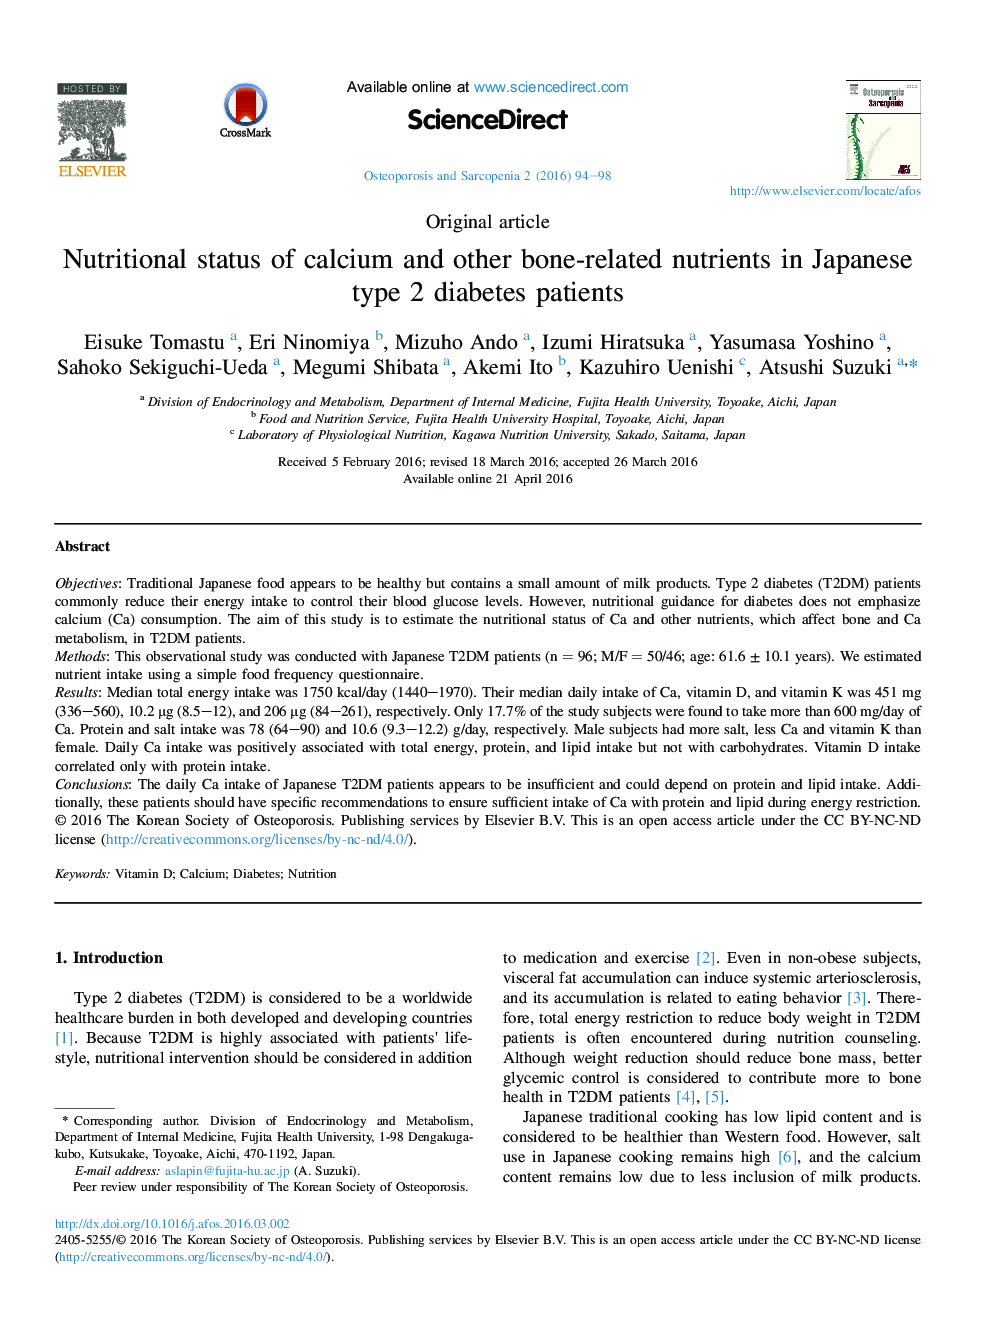 Nutritional status of calcium and other bone-related nutrients in Japanese type 2 diabetes patients 